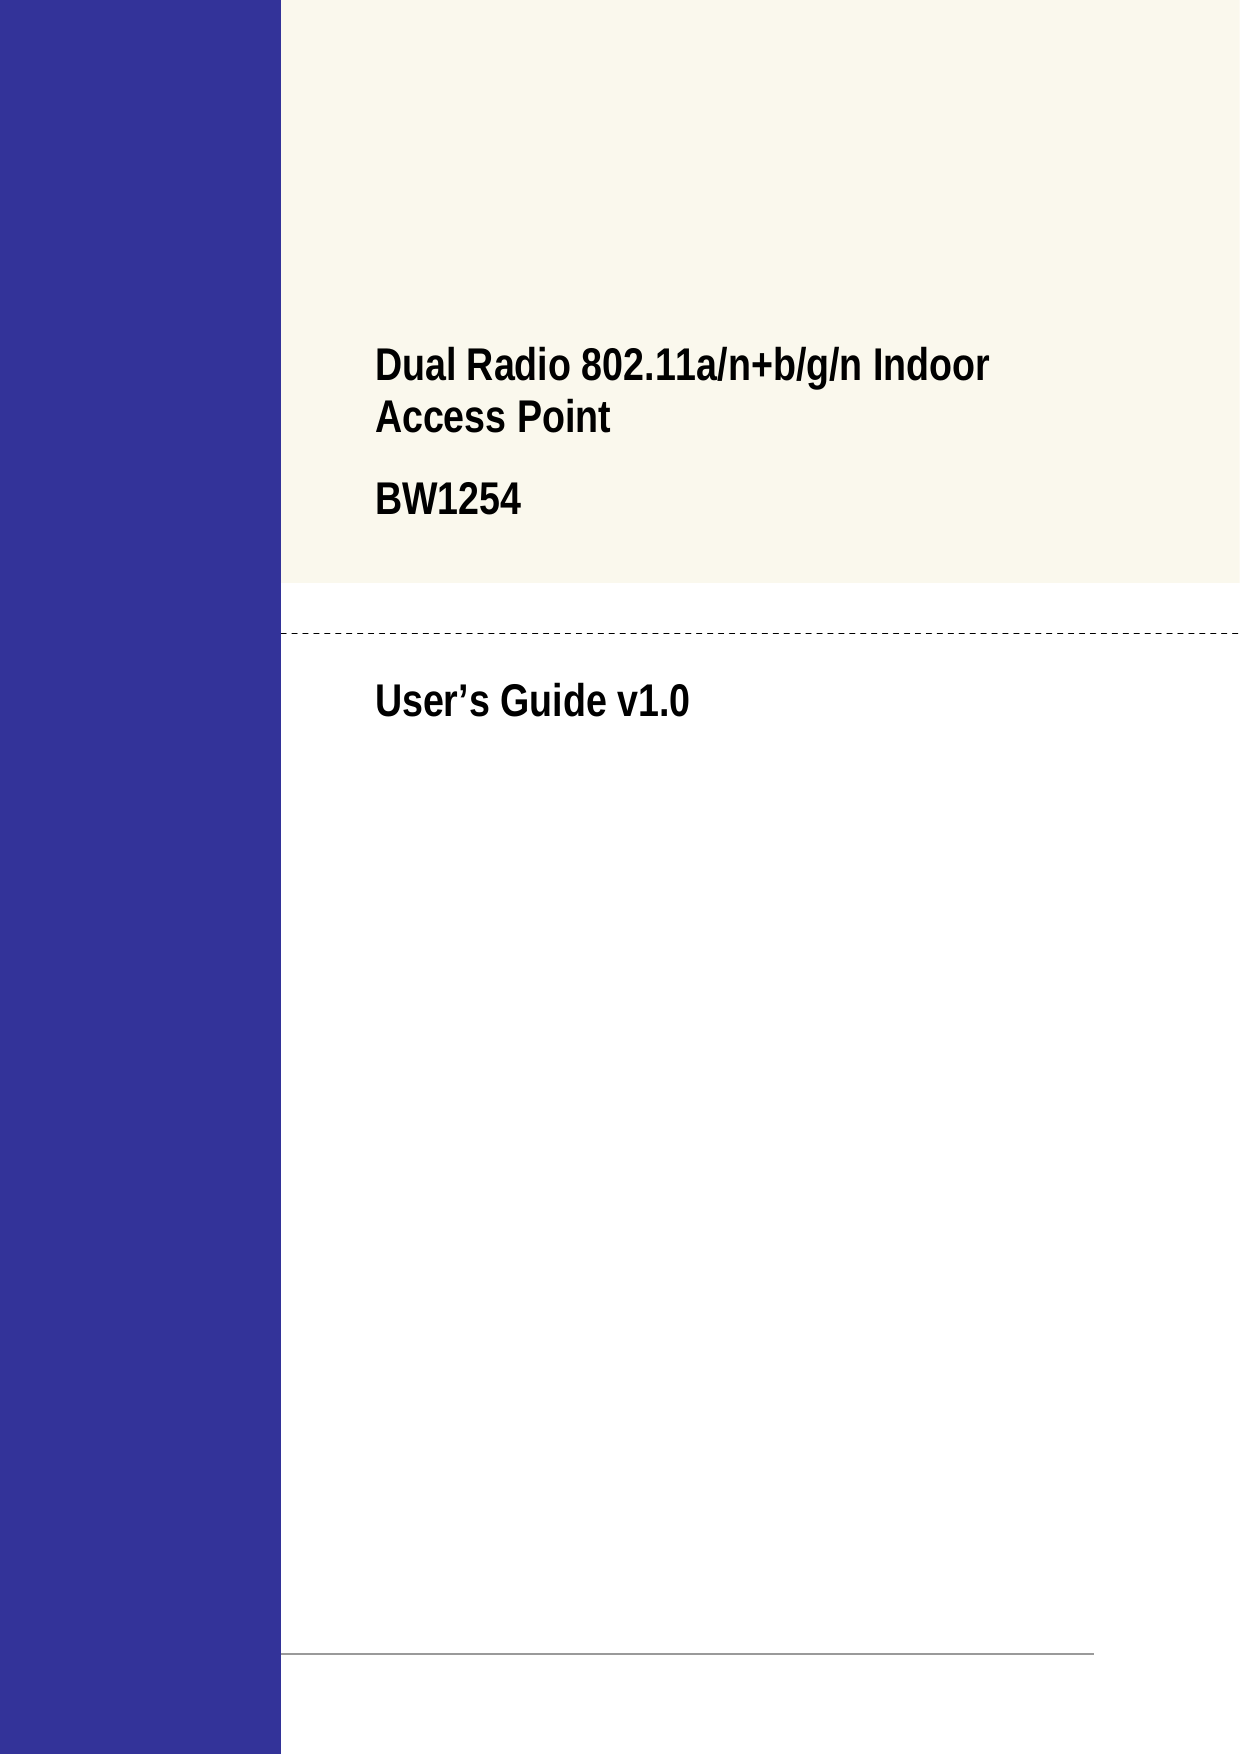     Dual Radio 802.11a/n+b/g/n Indoor Access Point BW1254  User’s Guide v1.0                              